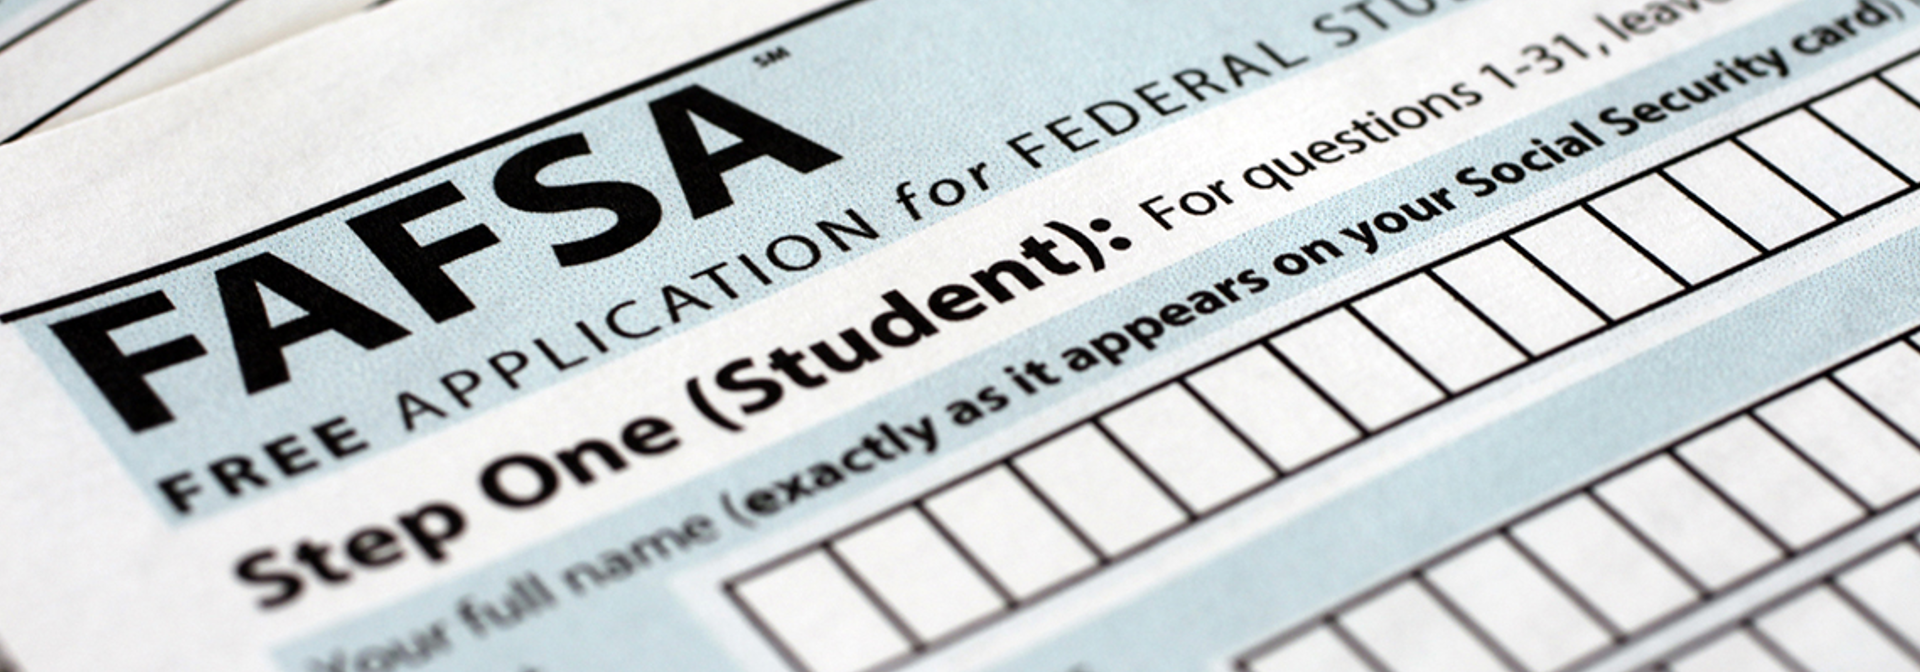 A close up view of the FAFSA application form for financial aid